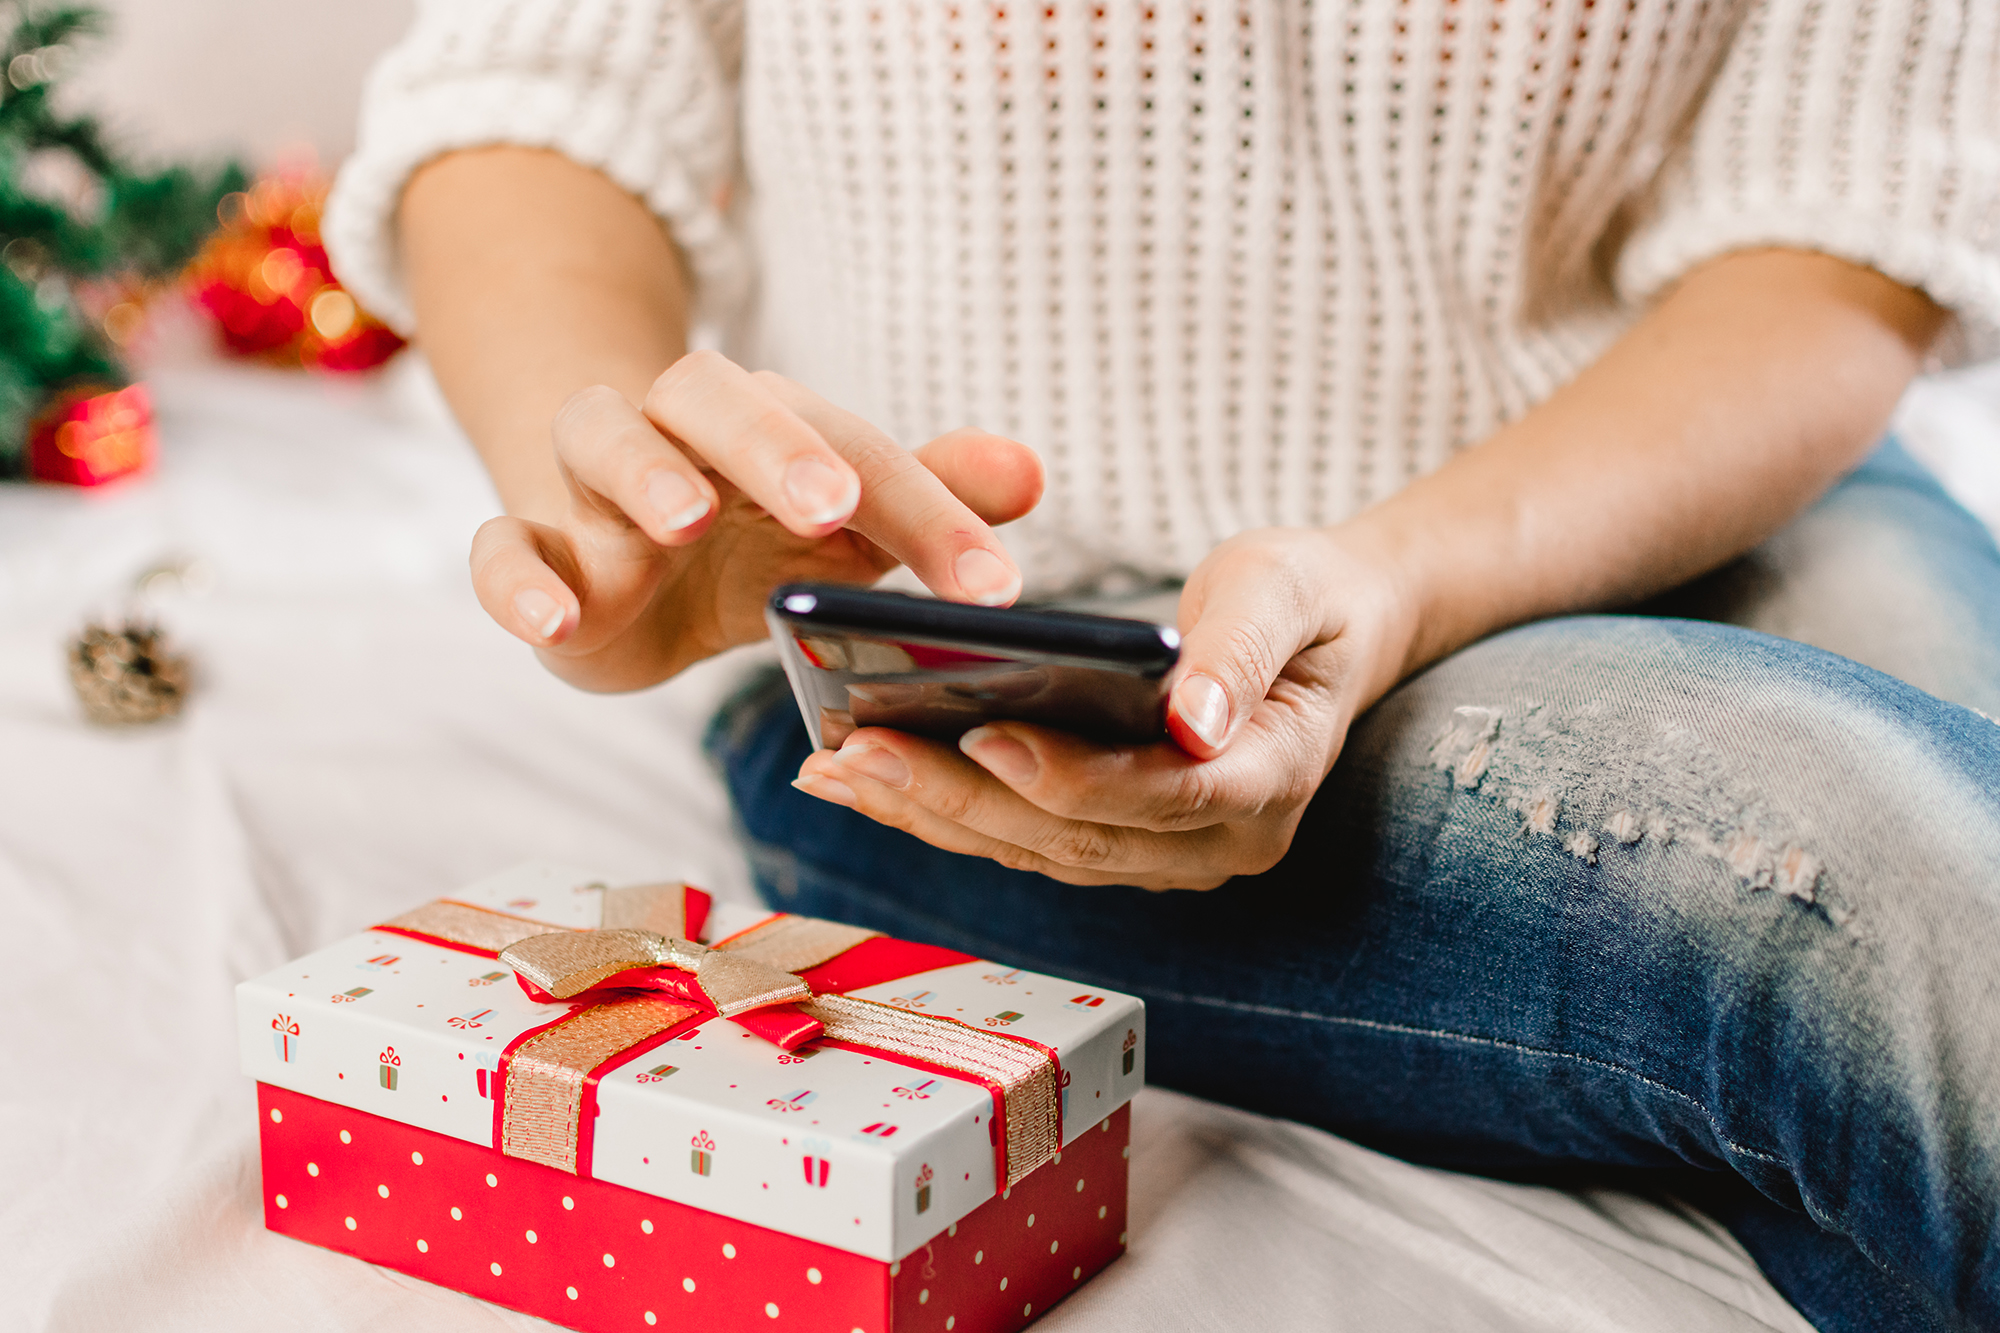 Making the most of Digital Christmas trends – part 2